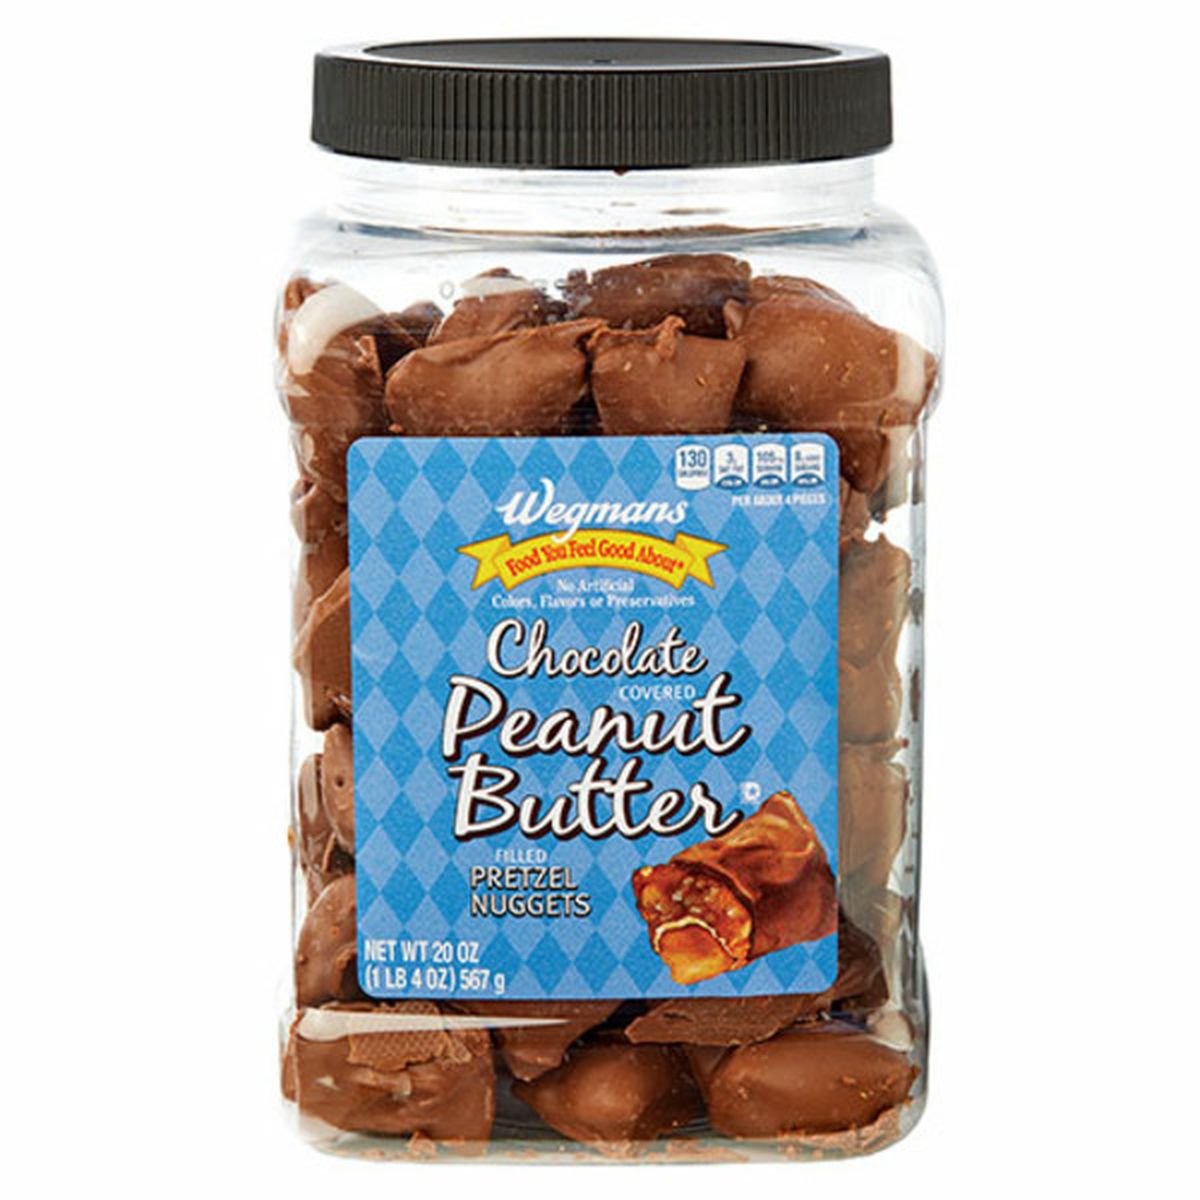 Calories in Wegmans Chocolate Covered Peanut Butter Filled Pretzel Nuggets